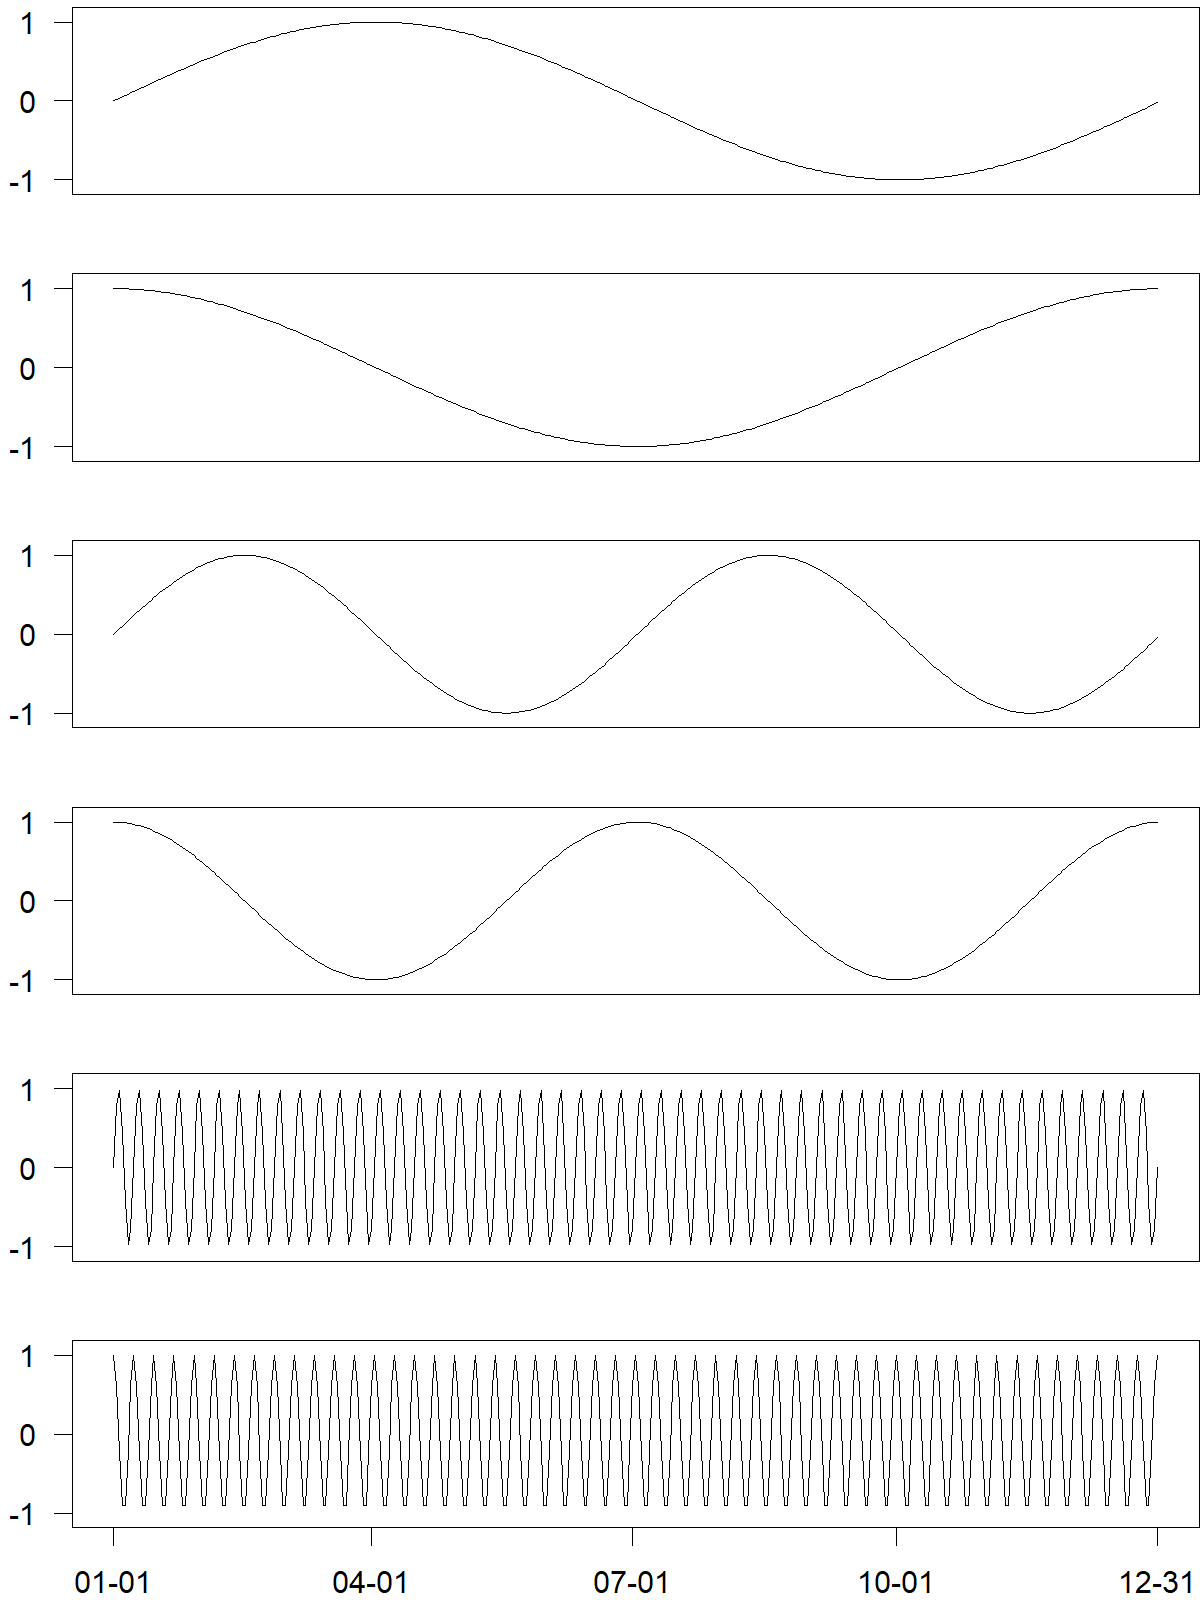  A figure containing 6 sub-plots. The common horizontal axis shows "01-01", "04-01", "07-01", "10-01" and "12-31". All vertical axes go from -1 to 1. The top two plots show a sine and a cosine wave with one period per year. The middle two plots show a sine and a cosine wave with two periods per year, and the bottom two plots show a sine and a cosine wave with one period per week.